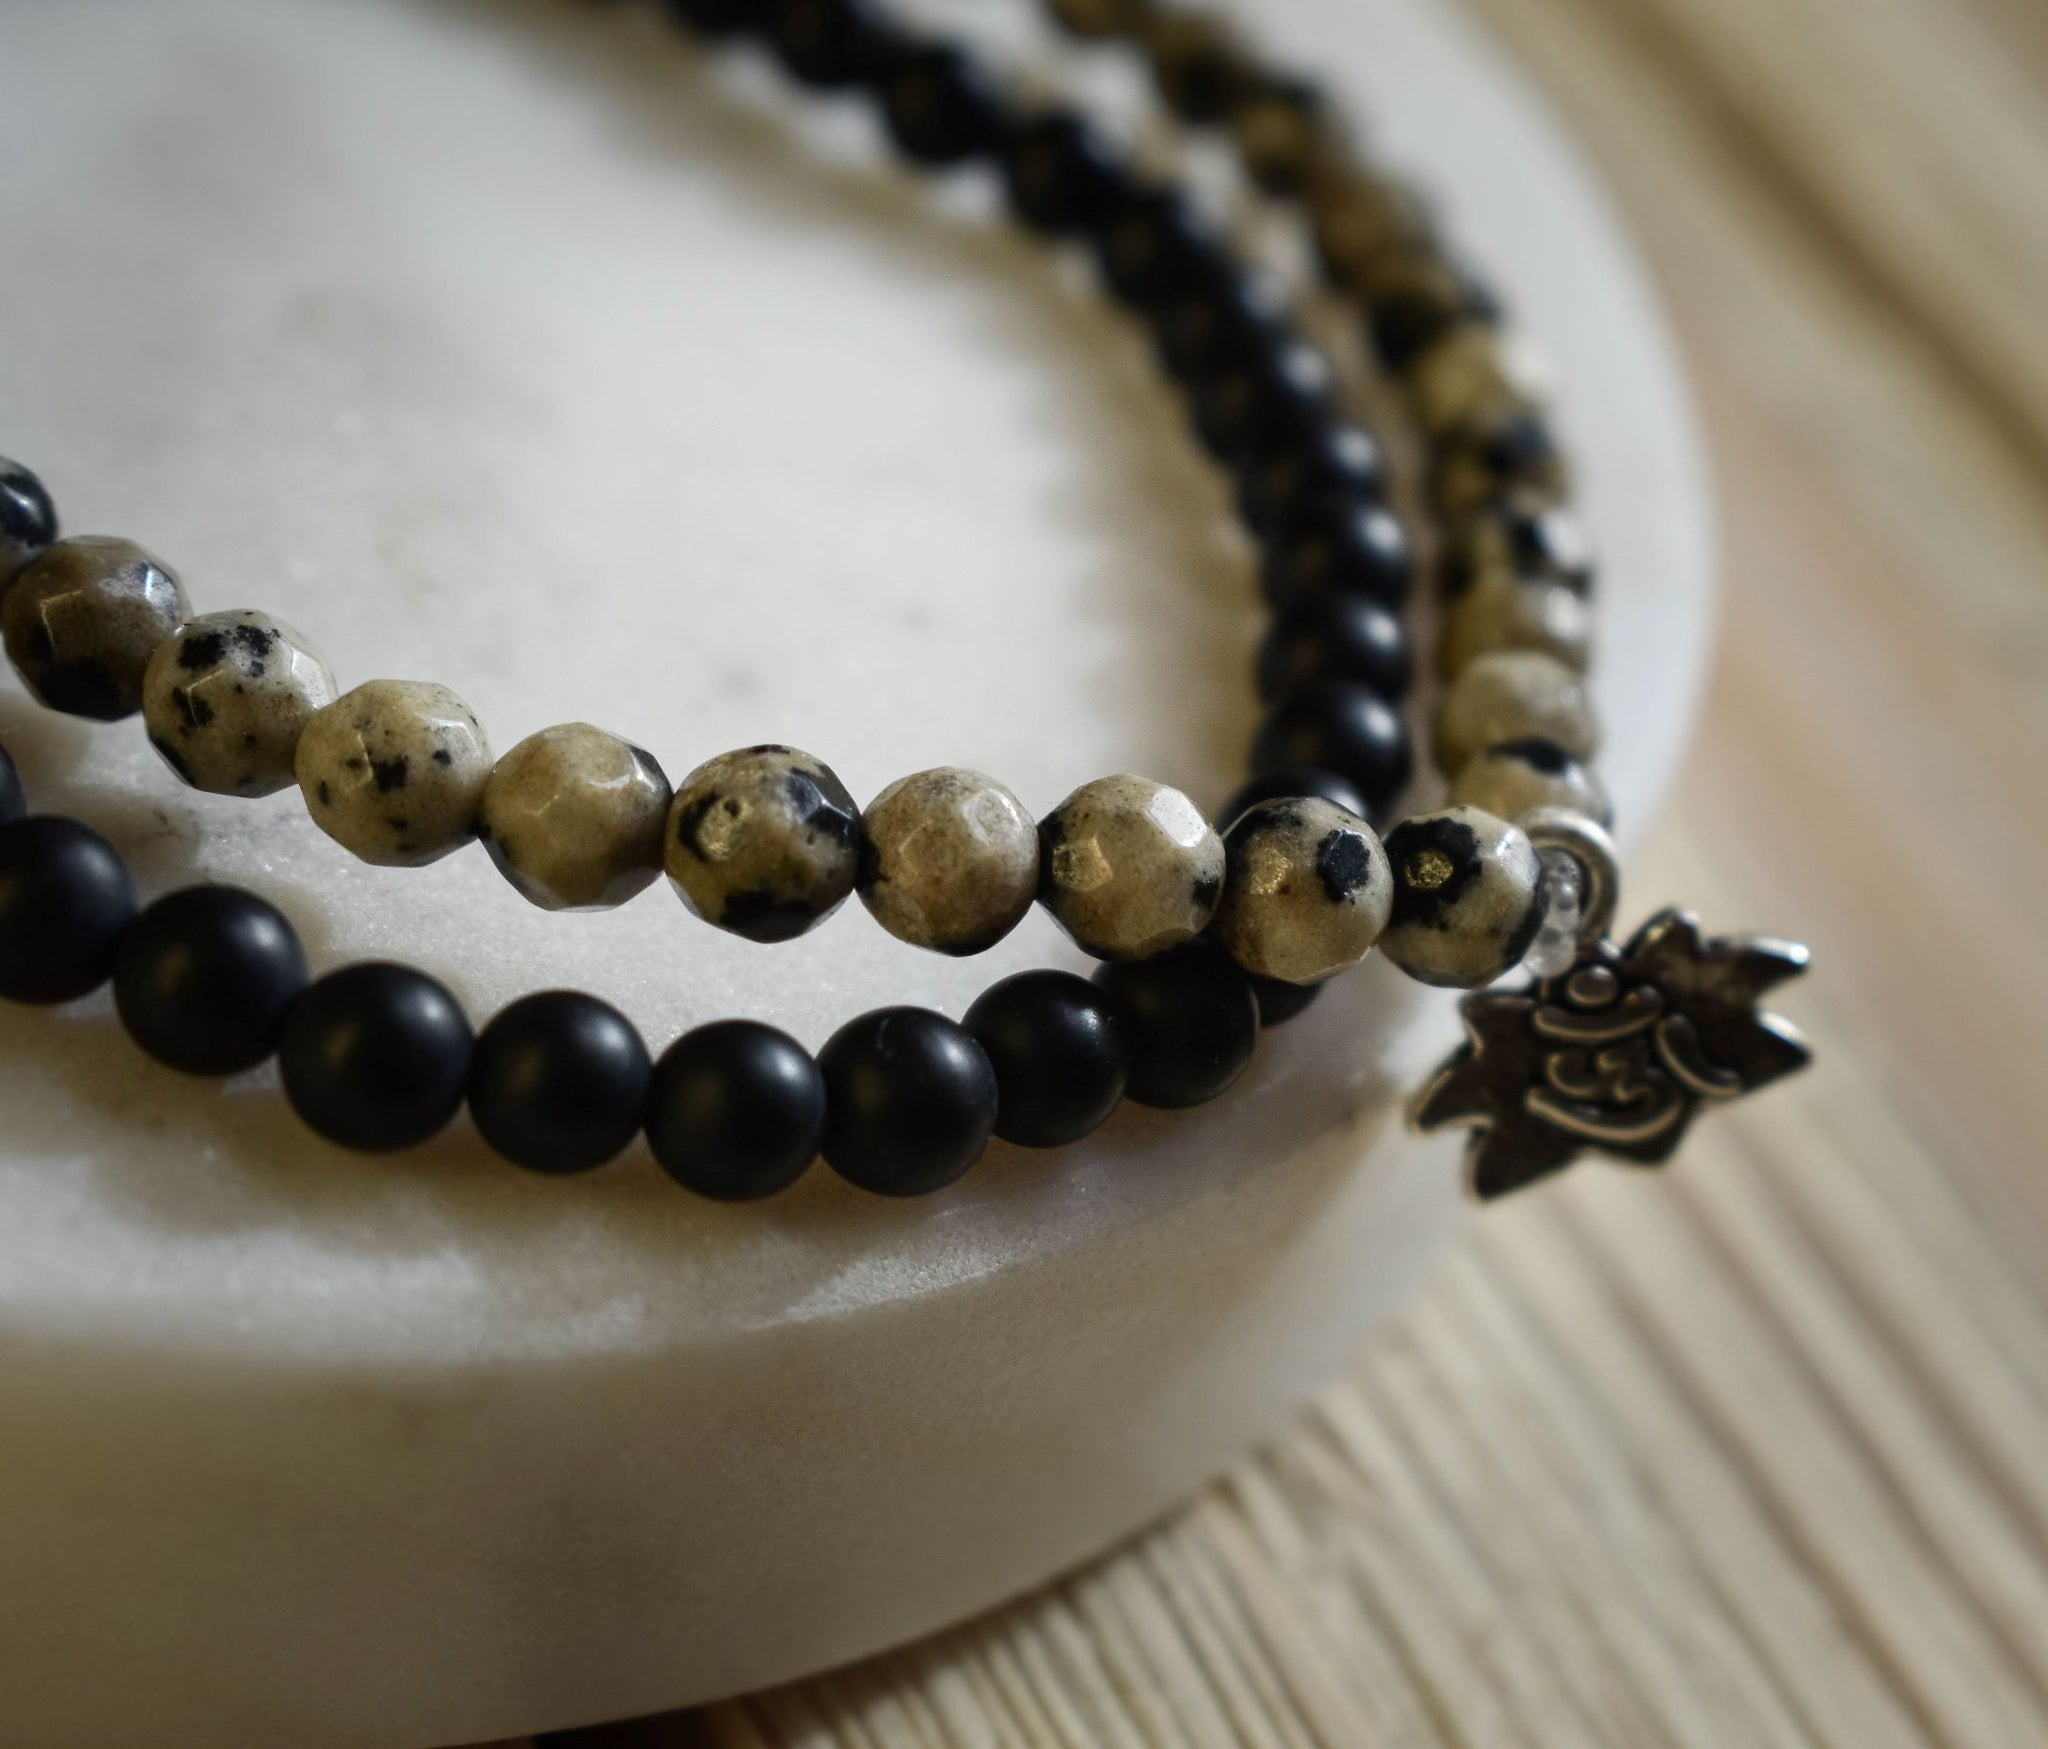 Faceted Dalmatian Jasper beads create an earthy, yet upscale modern look. This bracelet comes with a silver lotus charm. Stack them or mix + match your faves! Dalmatian Jasper: as the black + white coloring would suggest, this stone is a powerful balancer of light + dark, yin + yang, or positive + negative. It is known to be helpful in overcoming depression, nightmares, and anxiety. If there is an abundance of negative energy, this stone will do well to transmute those energies into their positive counterpa